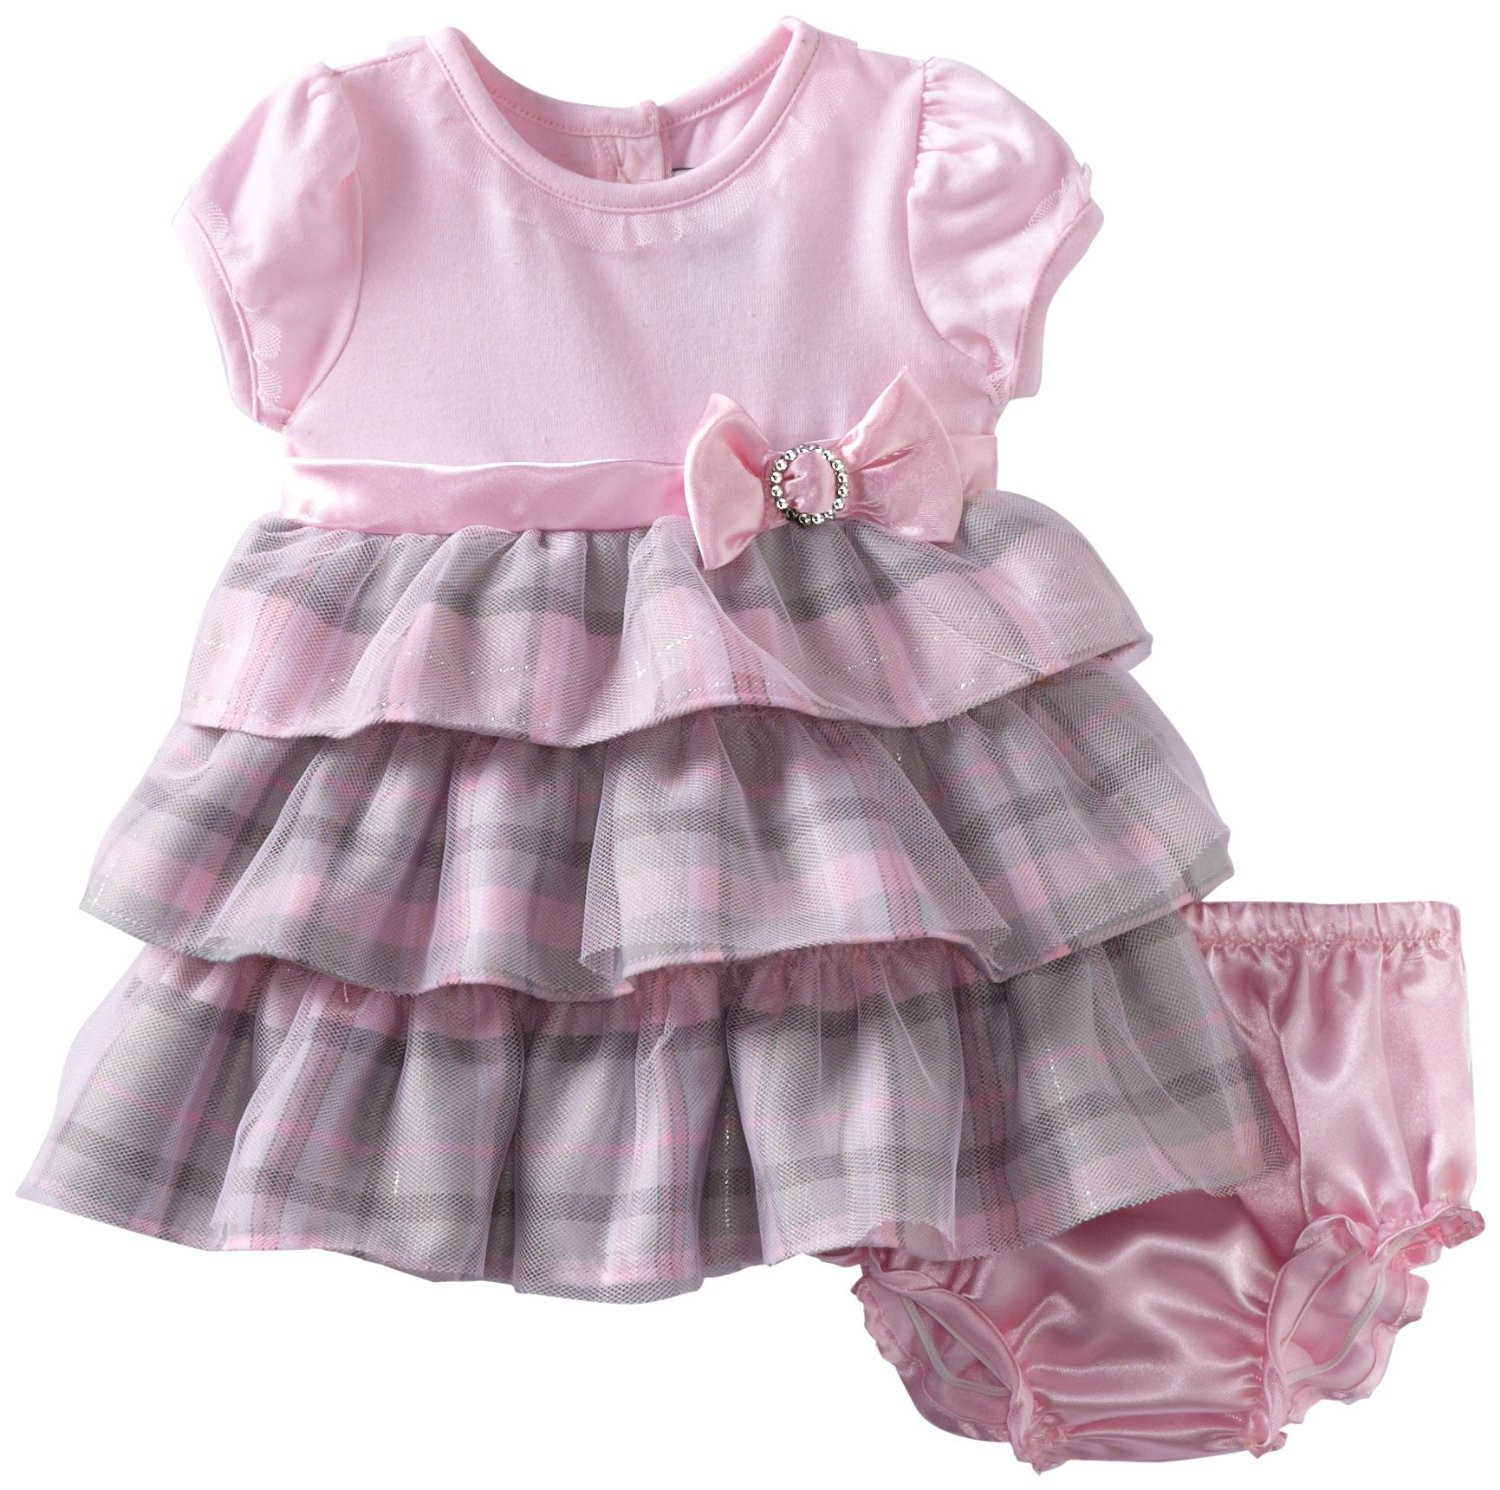 Baby Fashion Dress
 Suitable Choices of Baby Girl Dresses